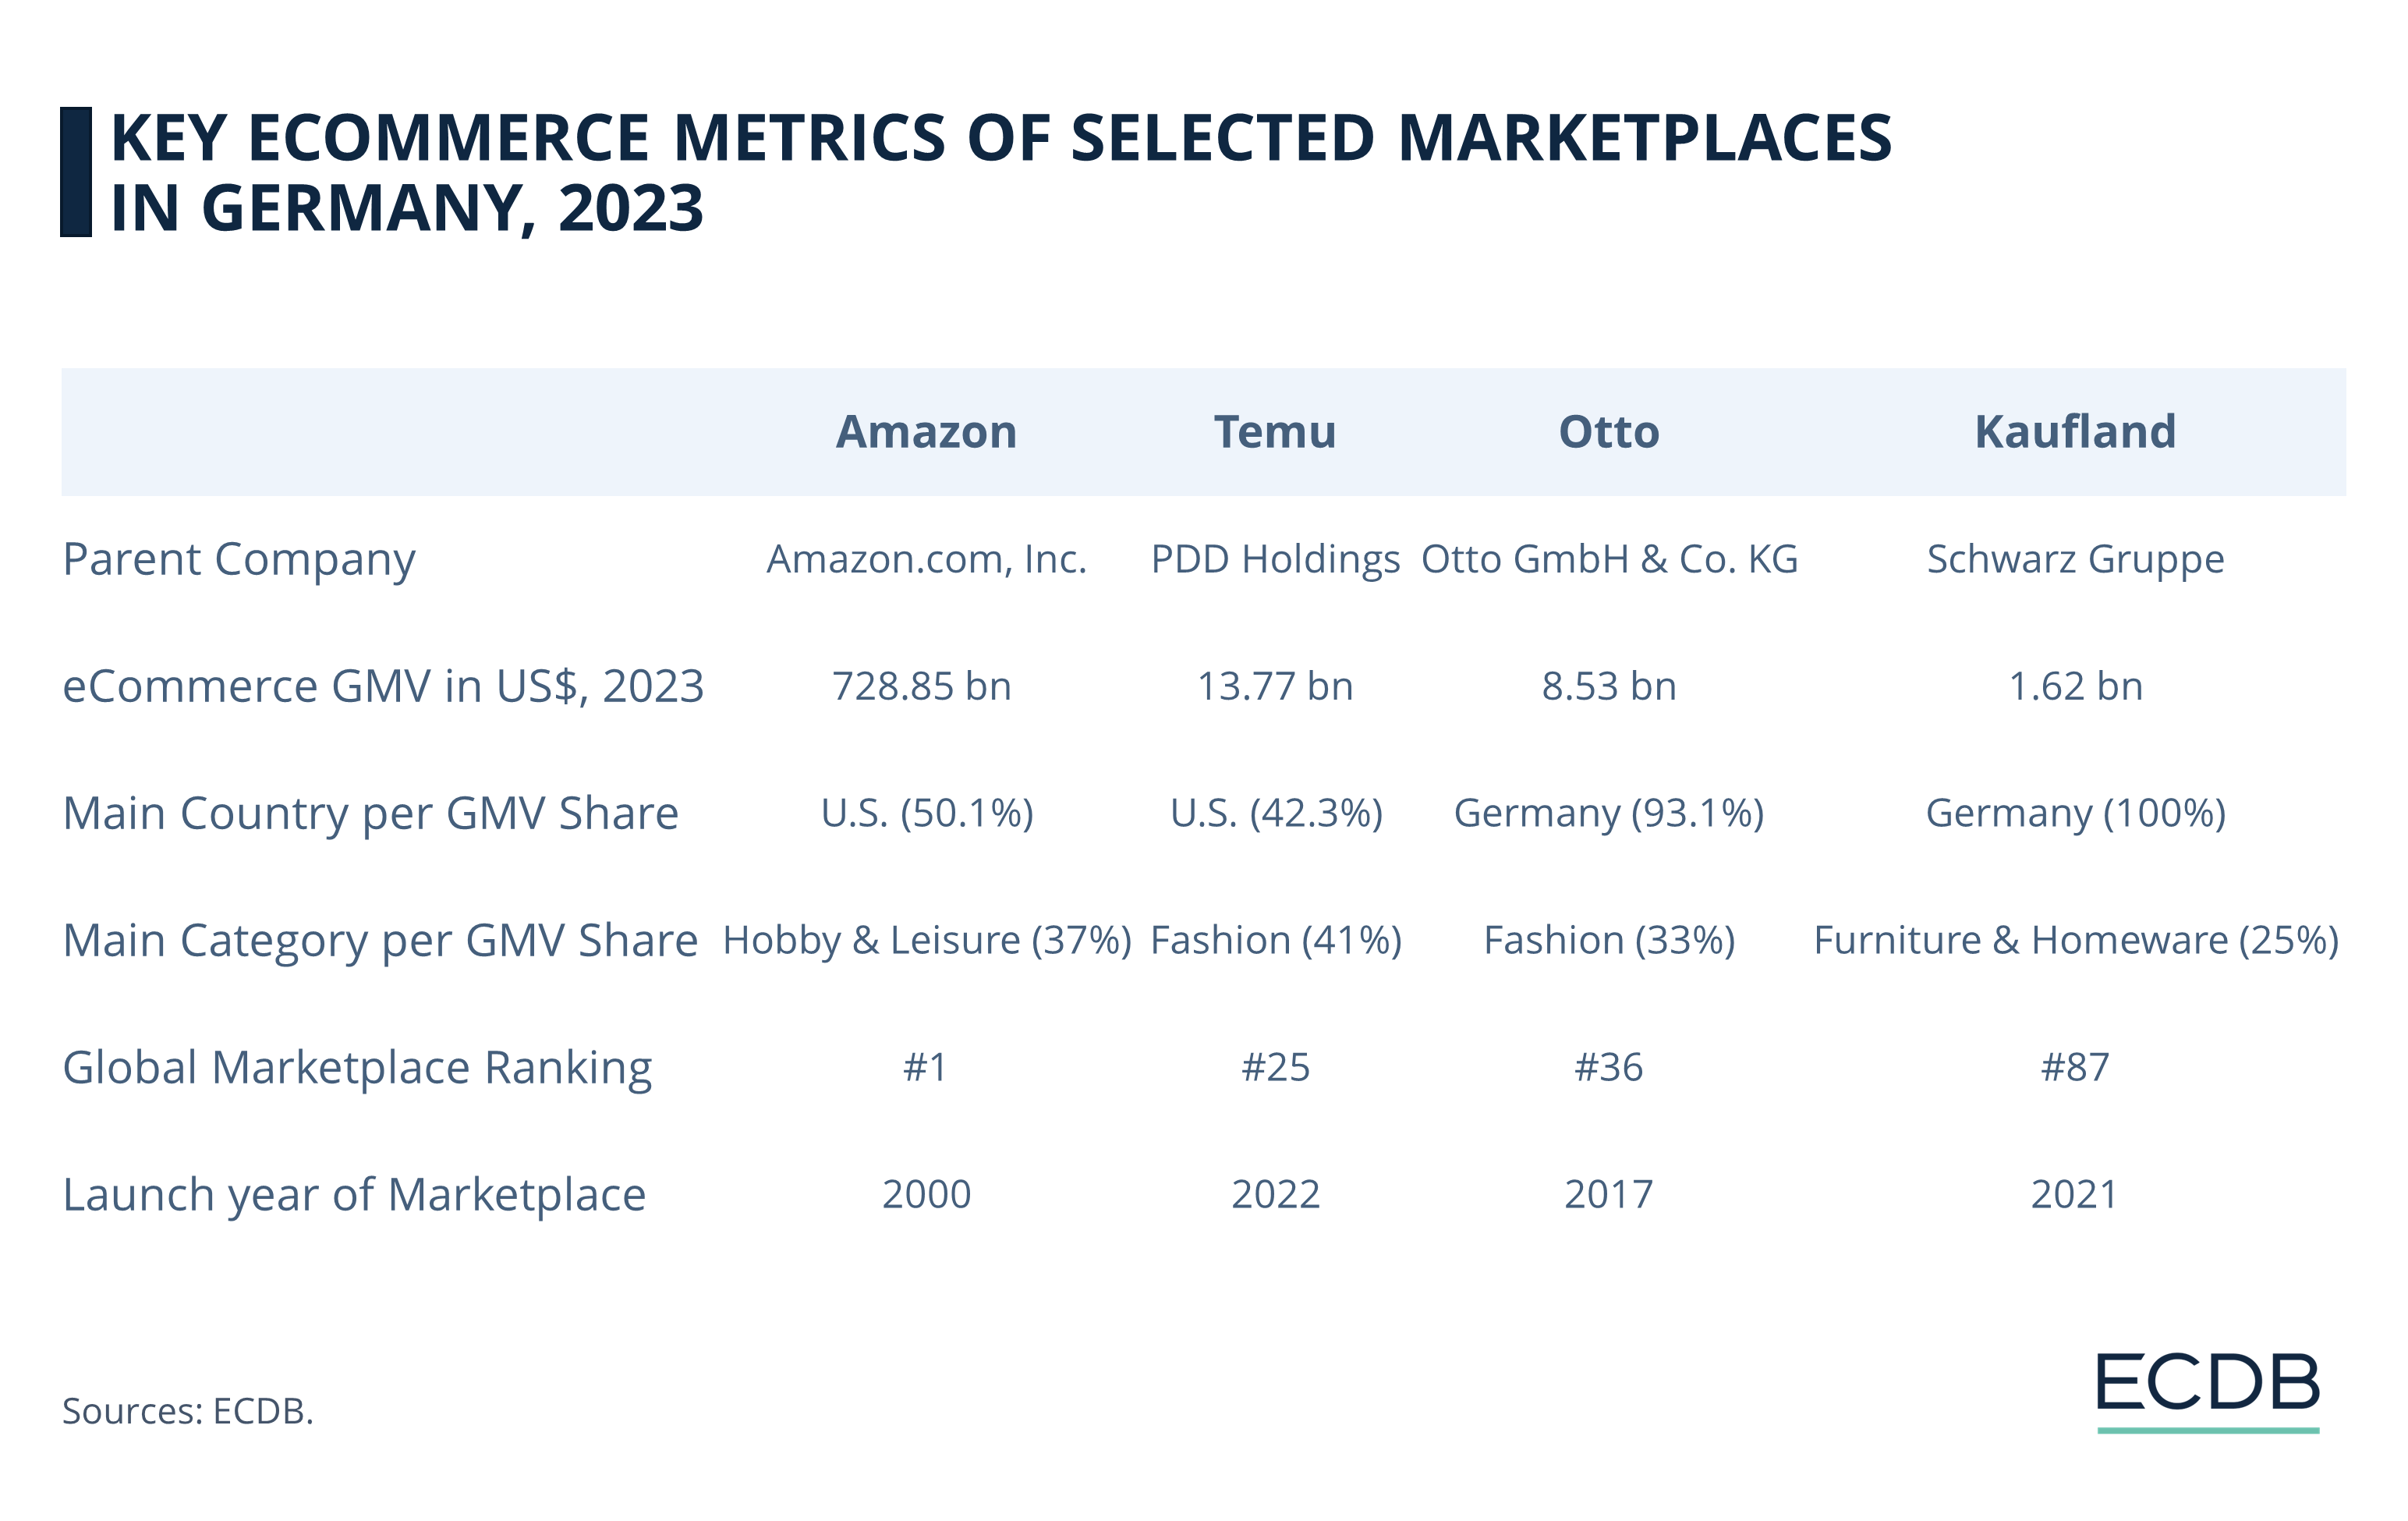 Key eCommerce Metrics of Selected Marketplaces in Germany, 2023